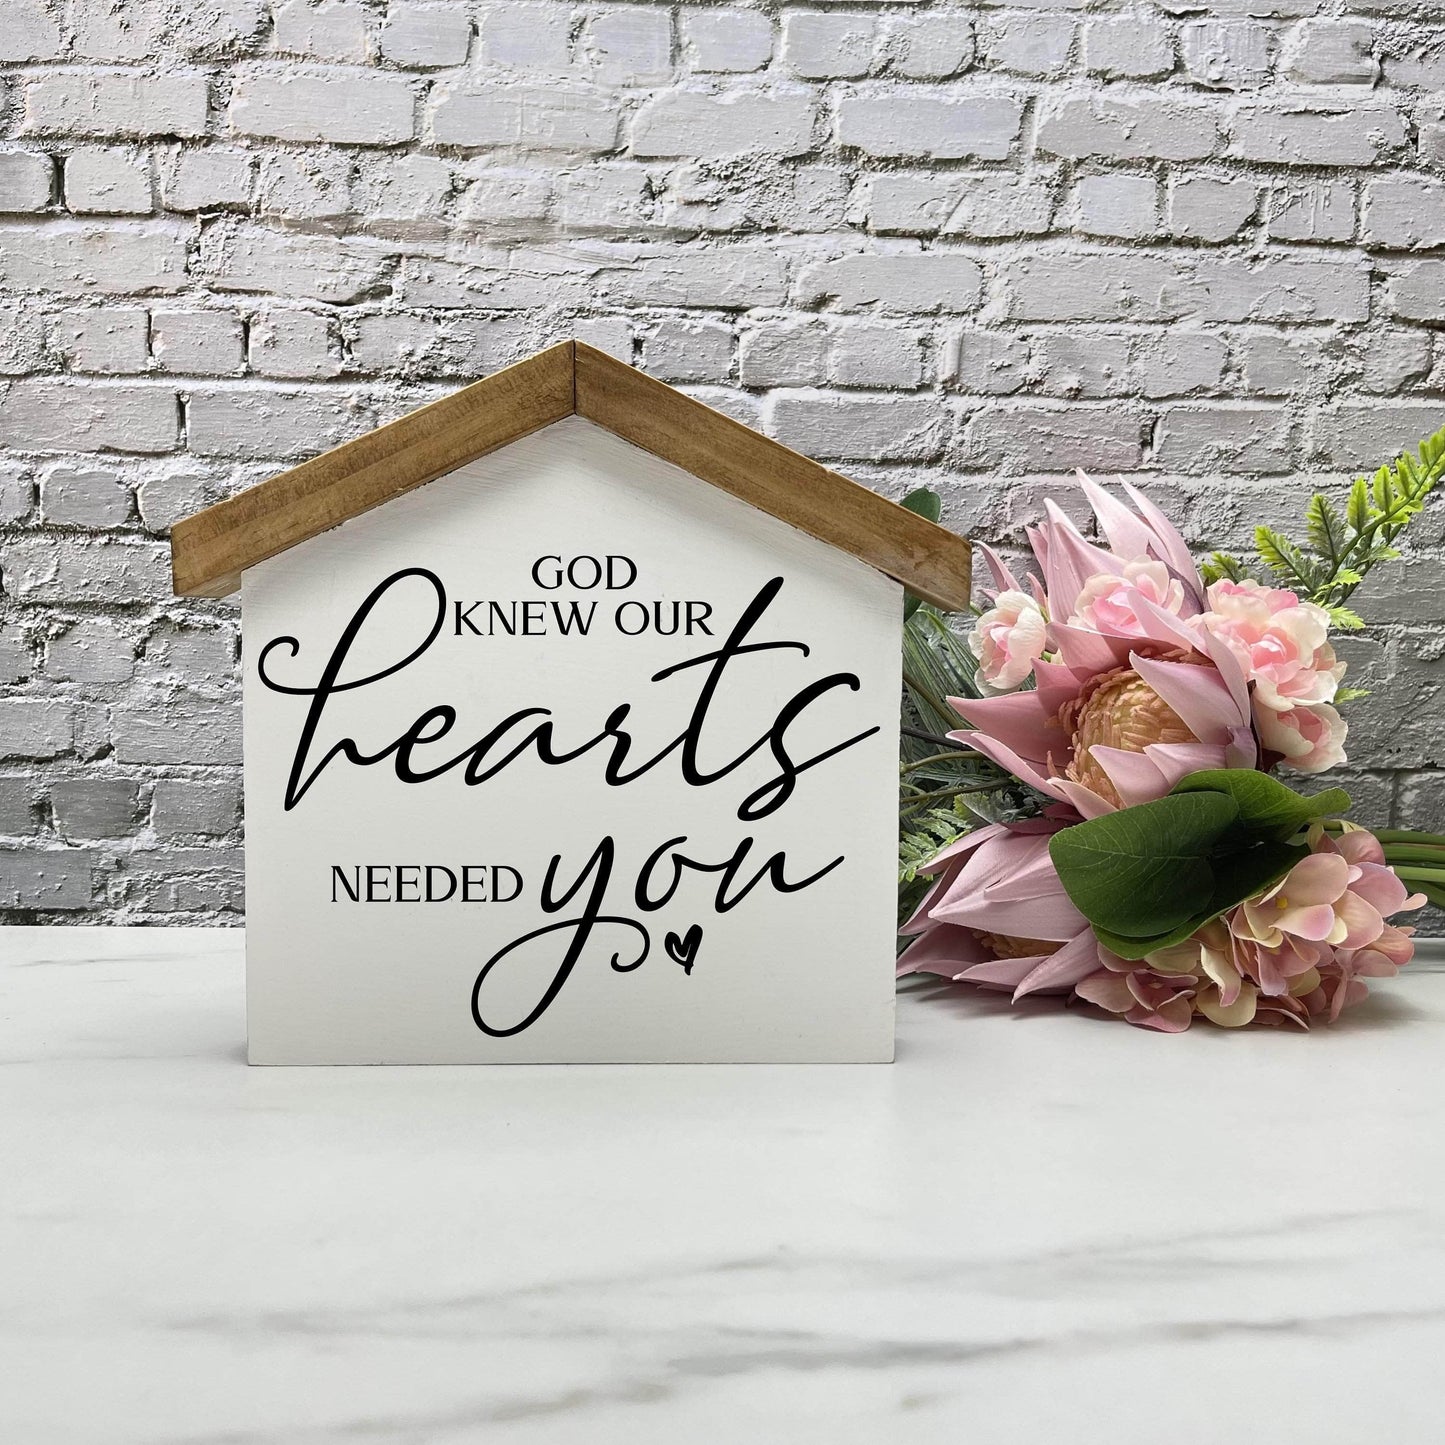 God knew our hearts needed you House wood sign, farmhouse sign, rustic decor, home decor